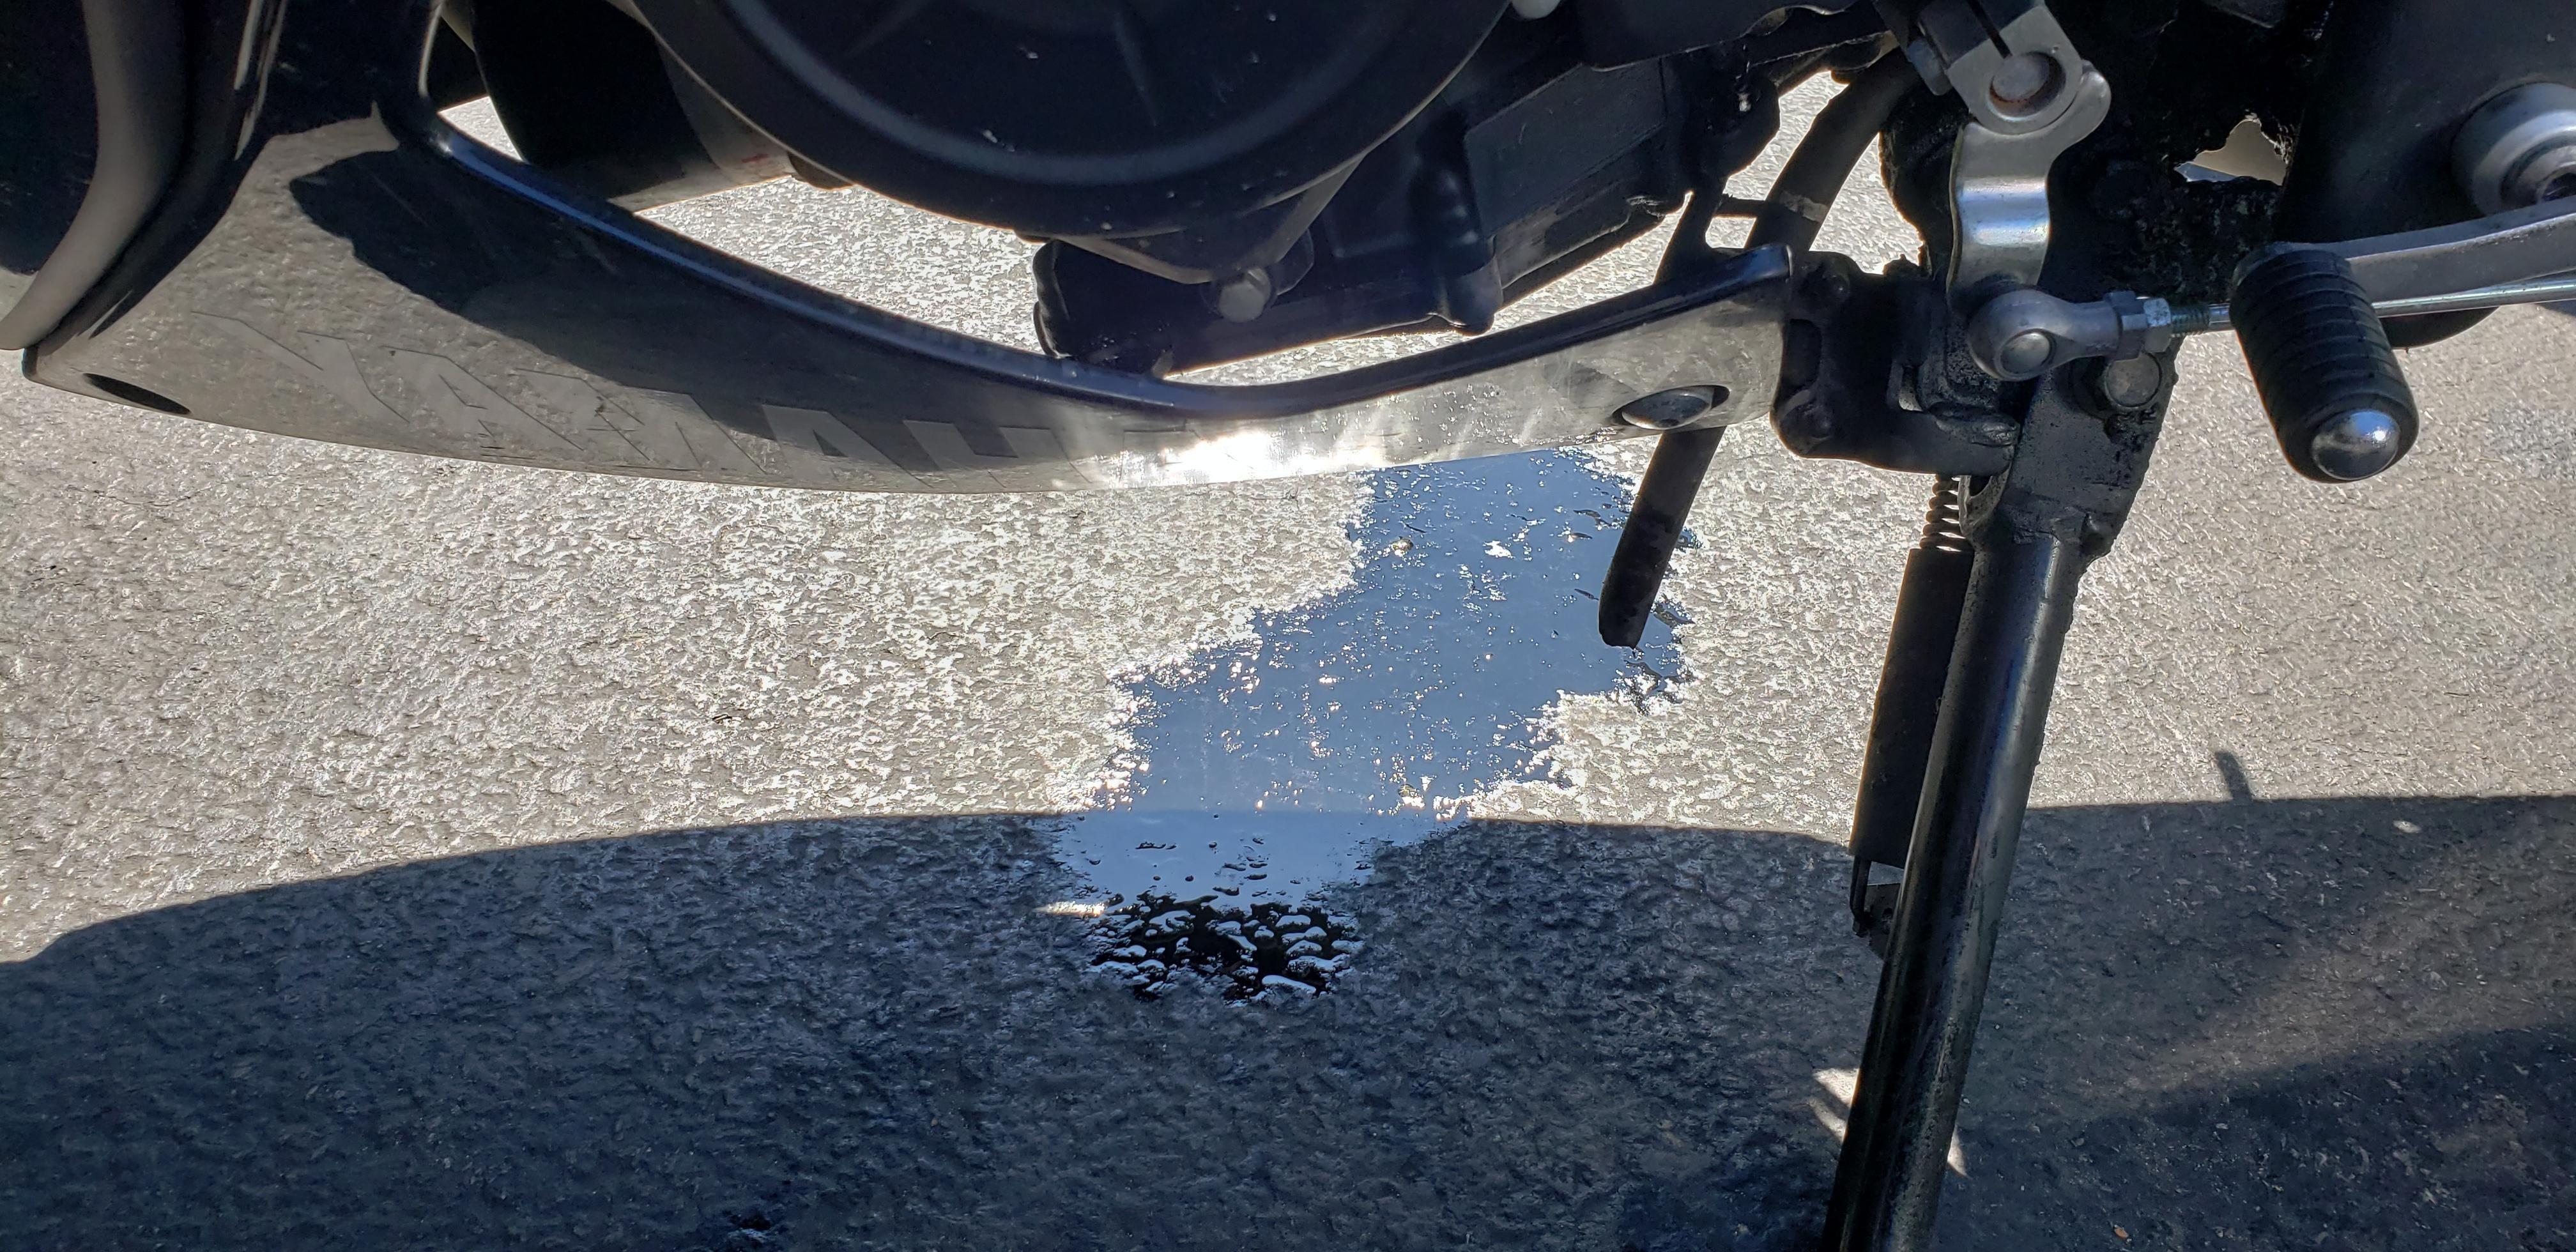 Bike leaking a good amount of oil | Yamaha R3 Forums